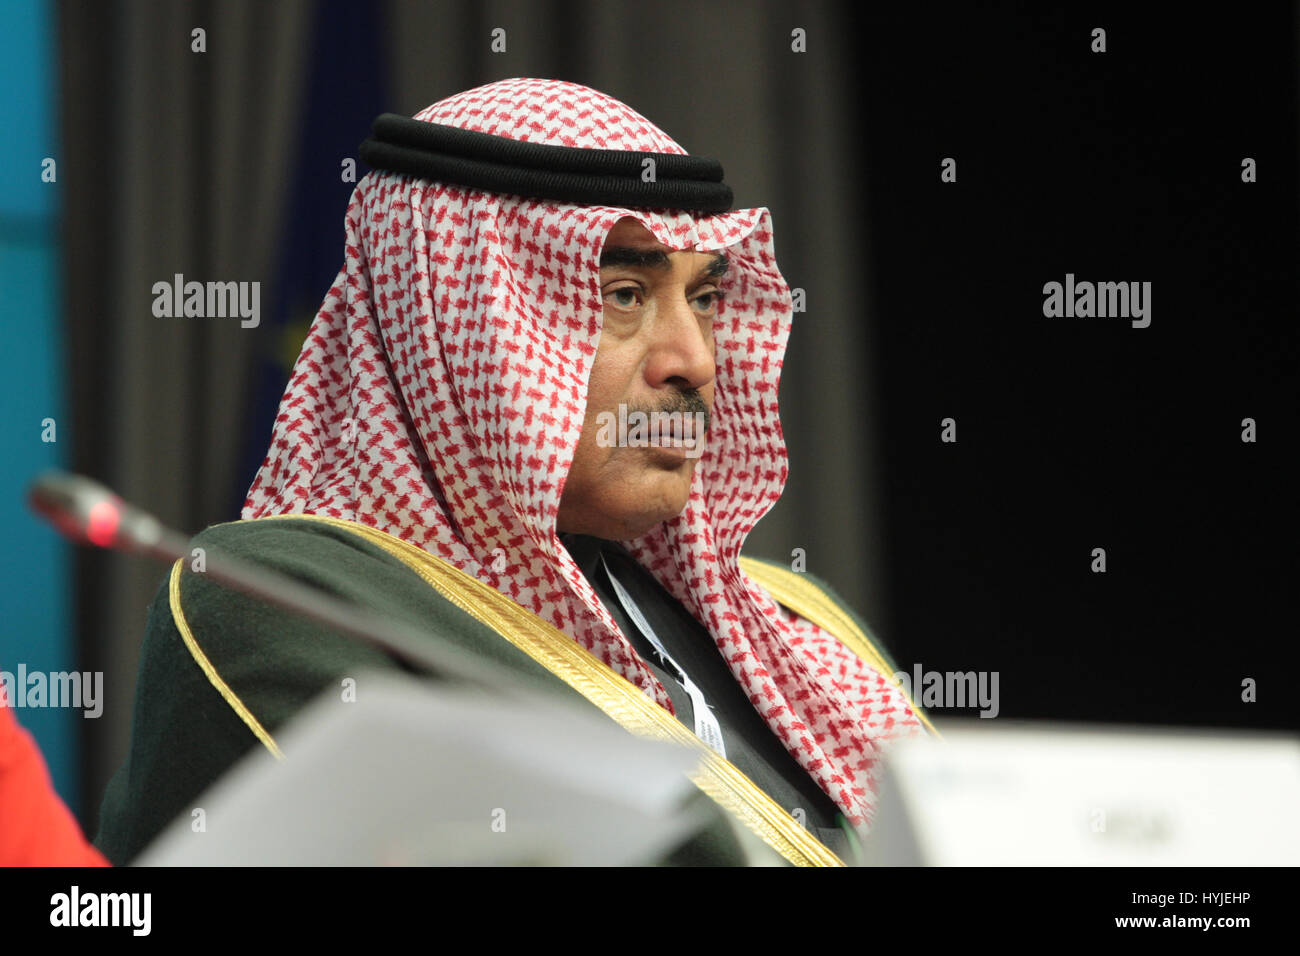 Brussels, Belgium. 05th Apr, 2017. Roundtable of Ministers, Ambassadors and State Secretary in support of Syria and the region, press conference Kuwait Minister for Foreing Affairs Sheikh Sabah Khalid Al Hamad Al Sabah Credit: Leo Cavallo/Alamy Live News Stock Photo